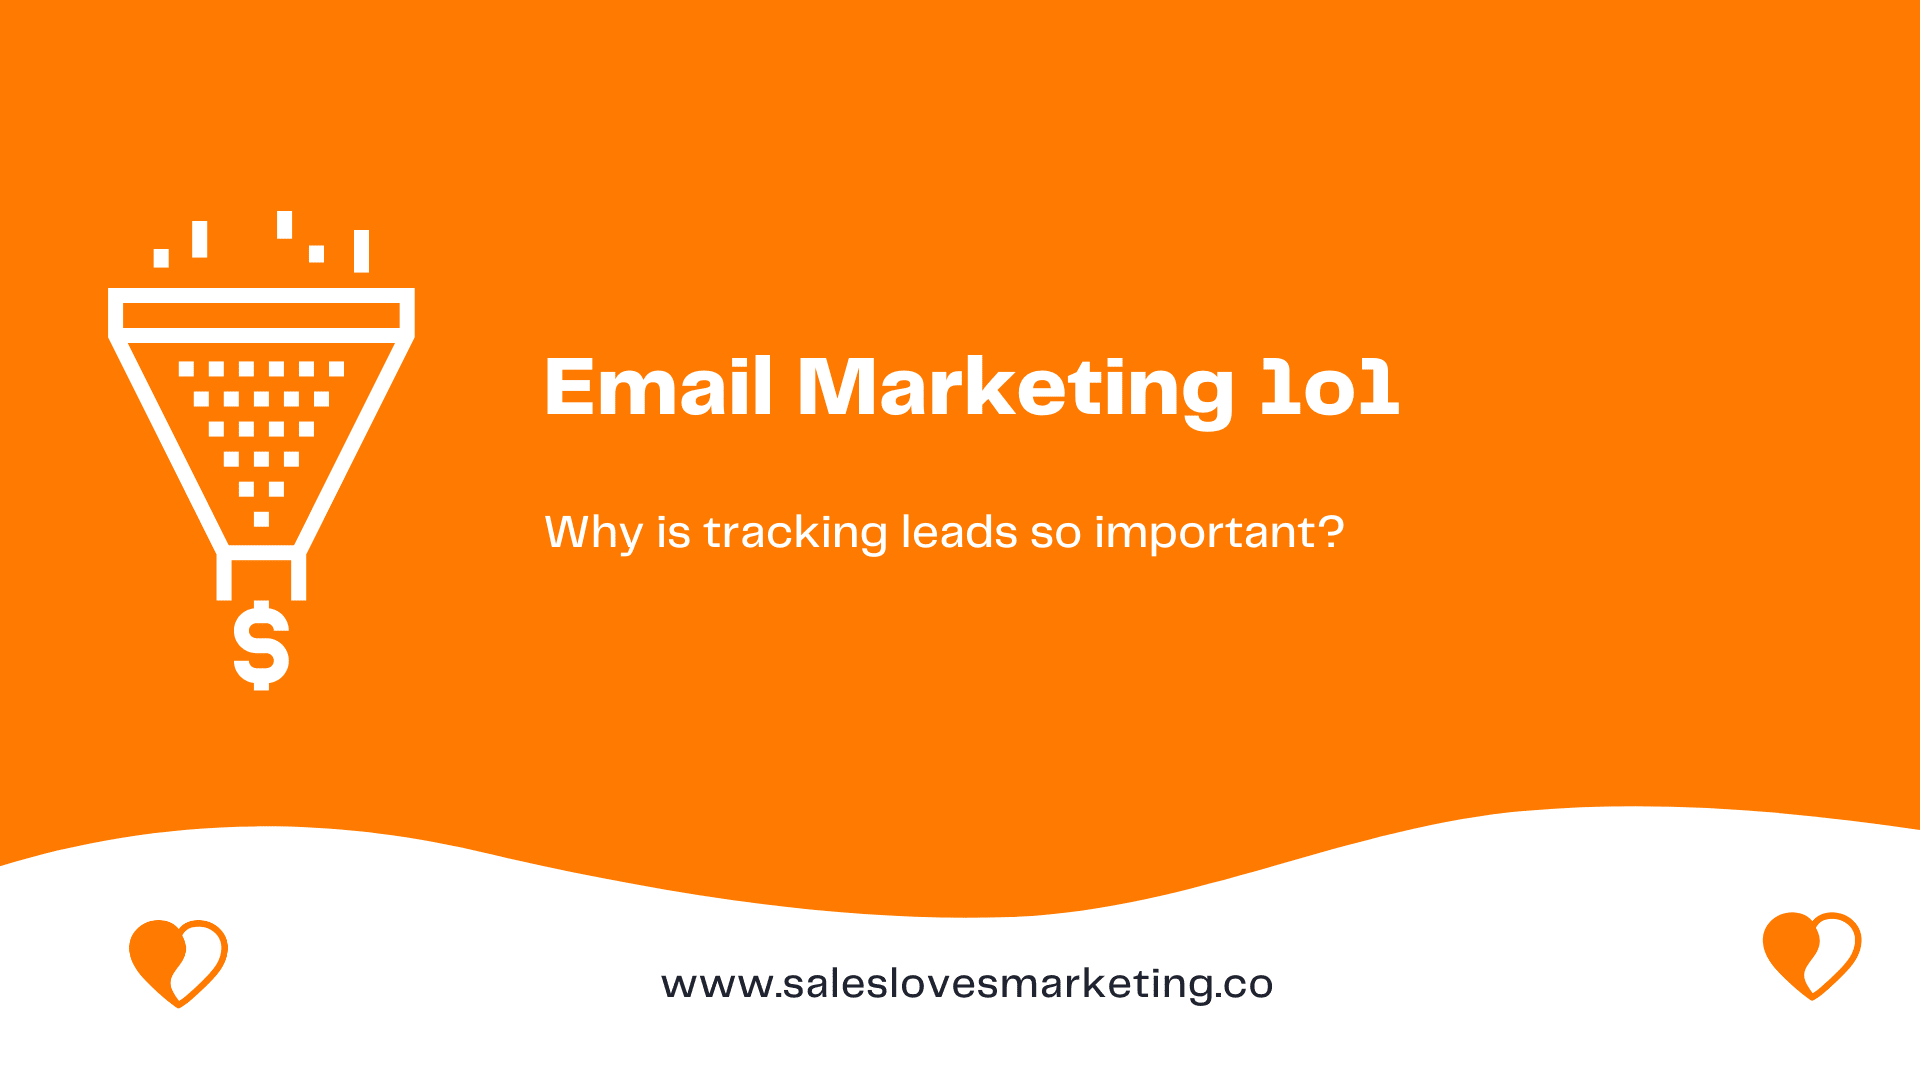 Email marketing 101: Why Is Tracking Leads So important?